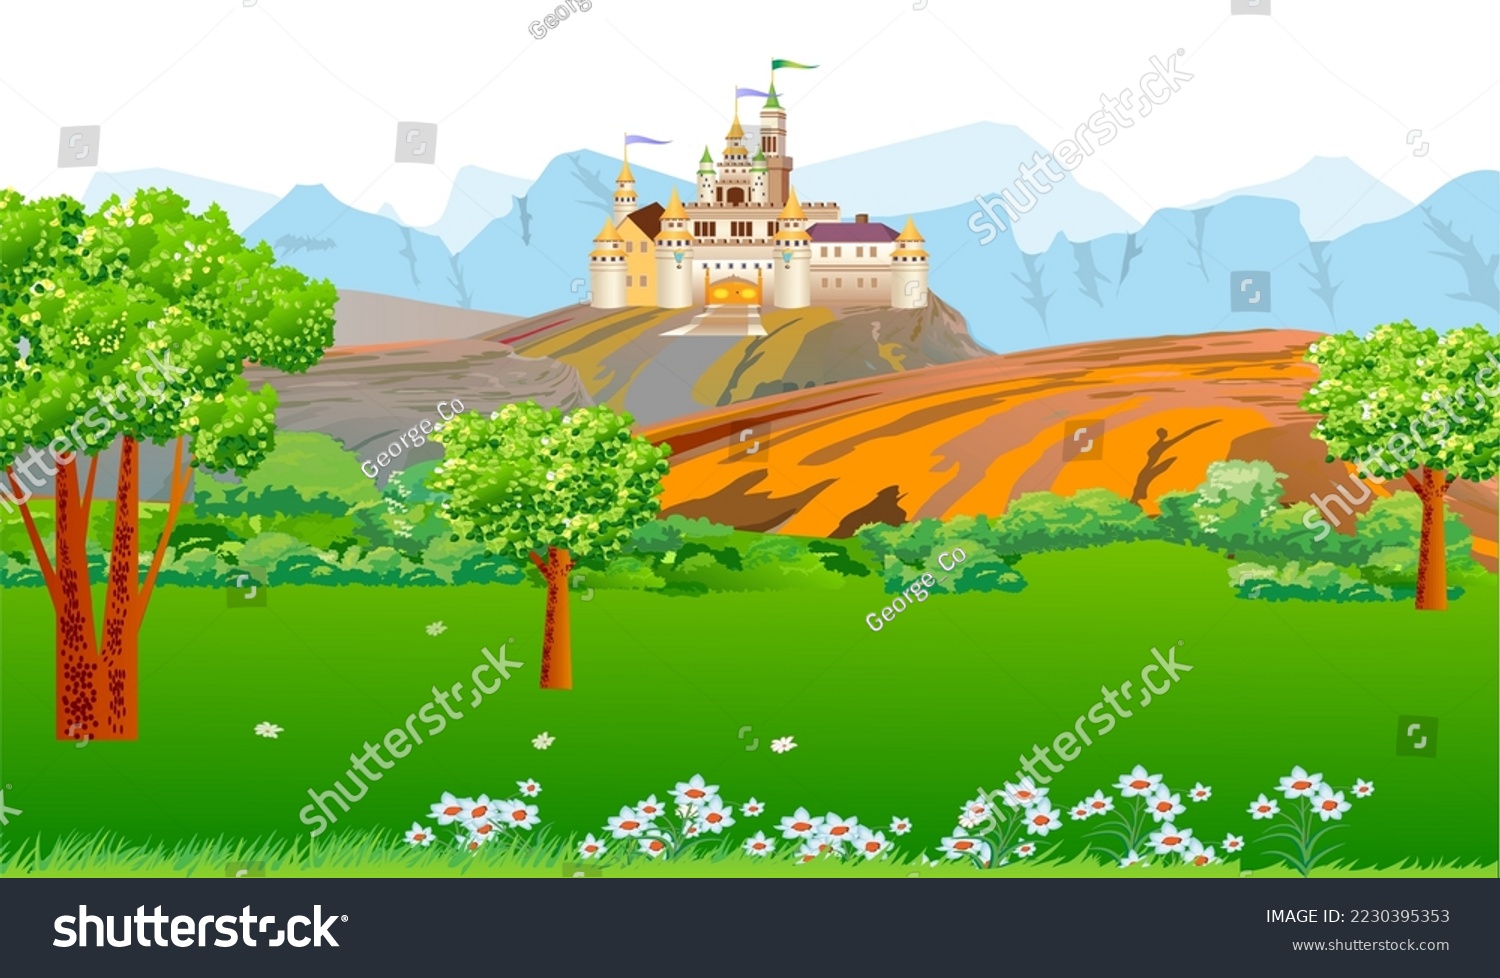 SVG of Vector illustration of a fairy tale castle landscape in the mountains. Impregnable medieval fortress. Cartoon style. svg